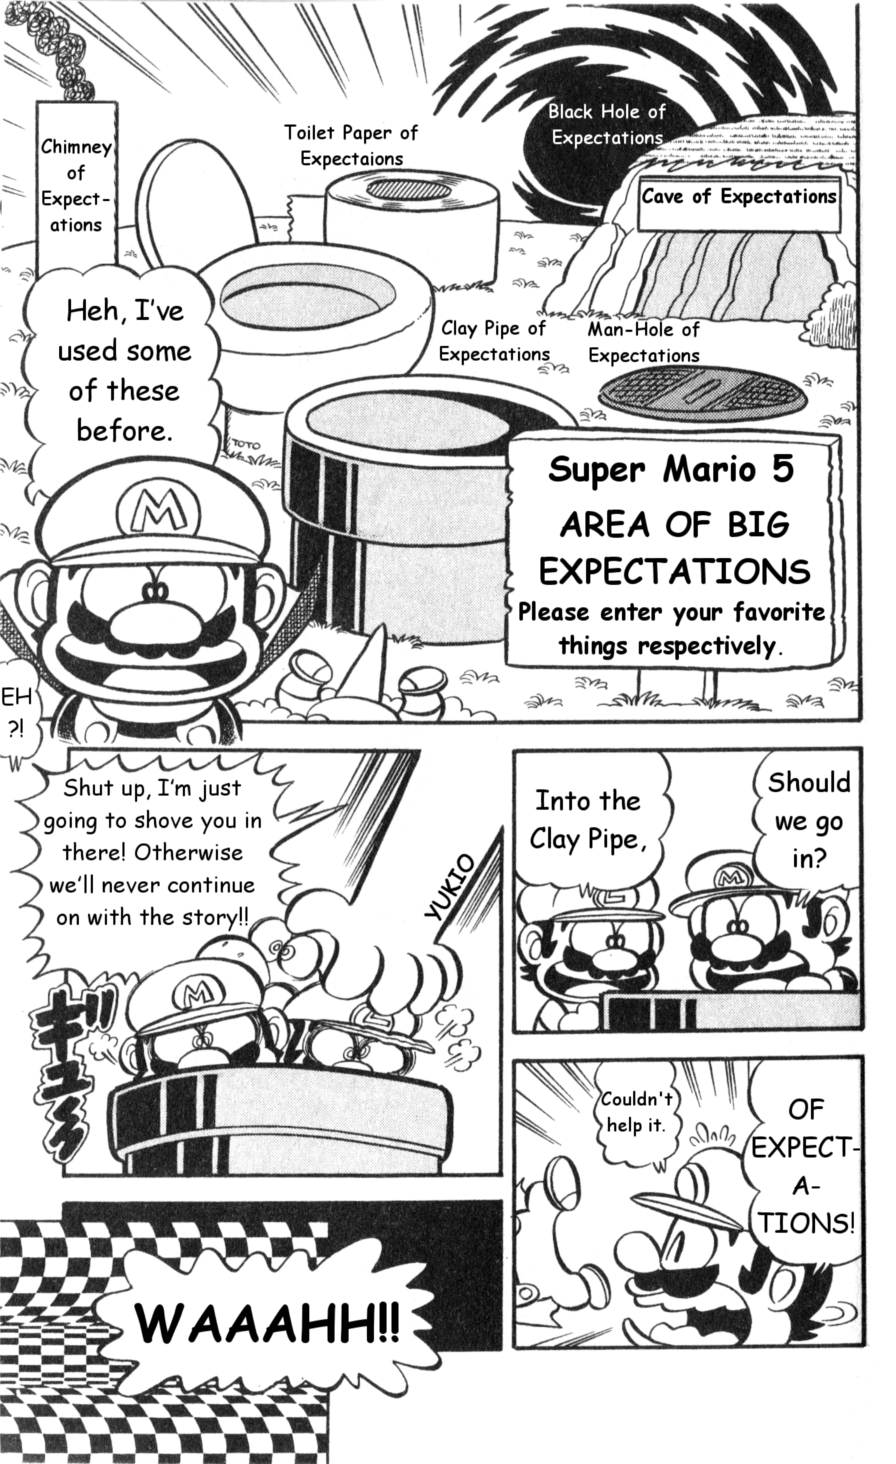 Super Mario-Kun Vol.1 Chapter 15: What Will Happen!? Mario 5 Appears!? - Picture 3